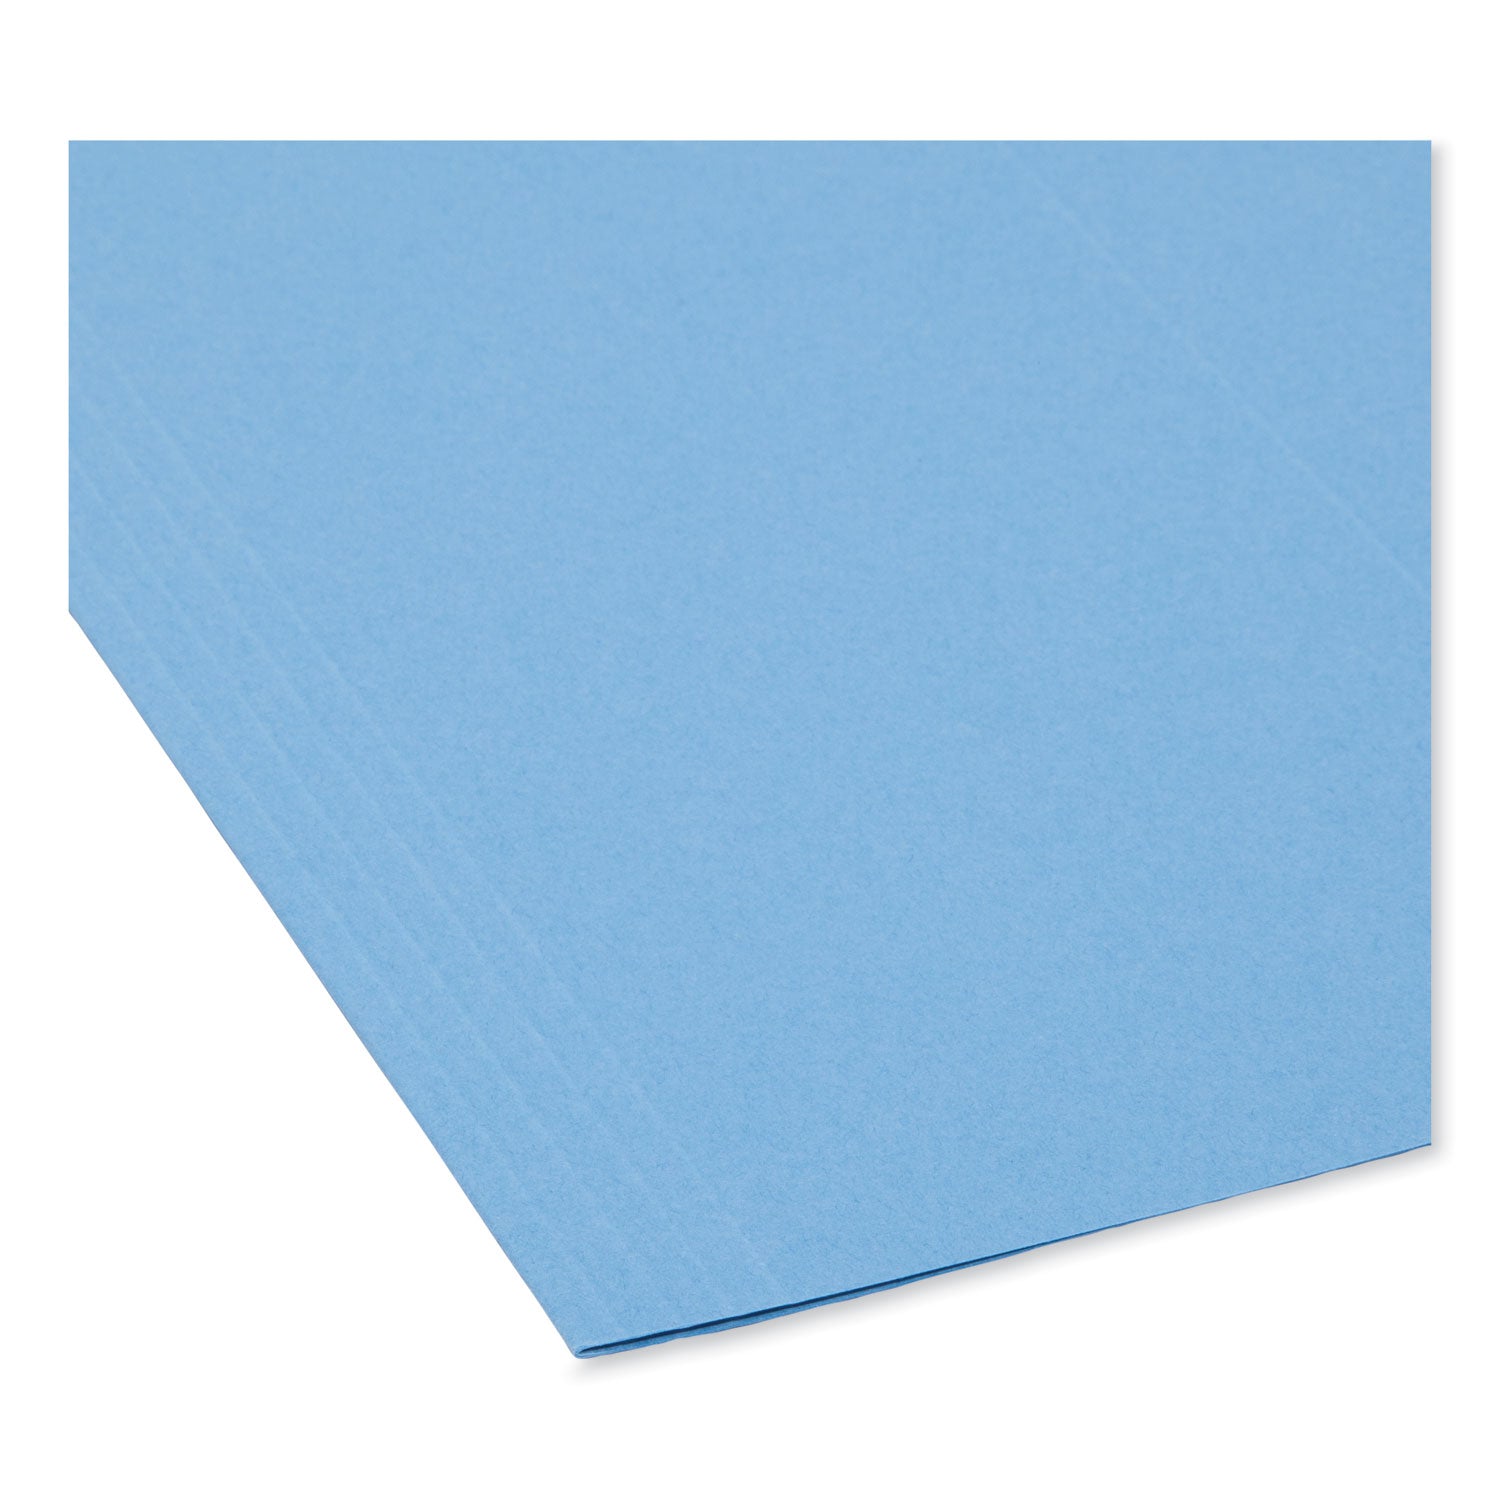 TUFF Hanging Folders with Easy Slide Tab, Letter Size, 1/3-Cut Tabs, Blue, 18/Box - 